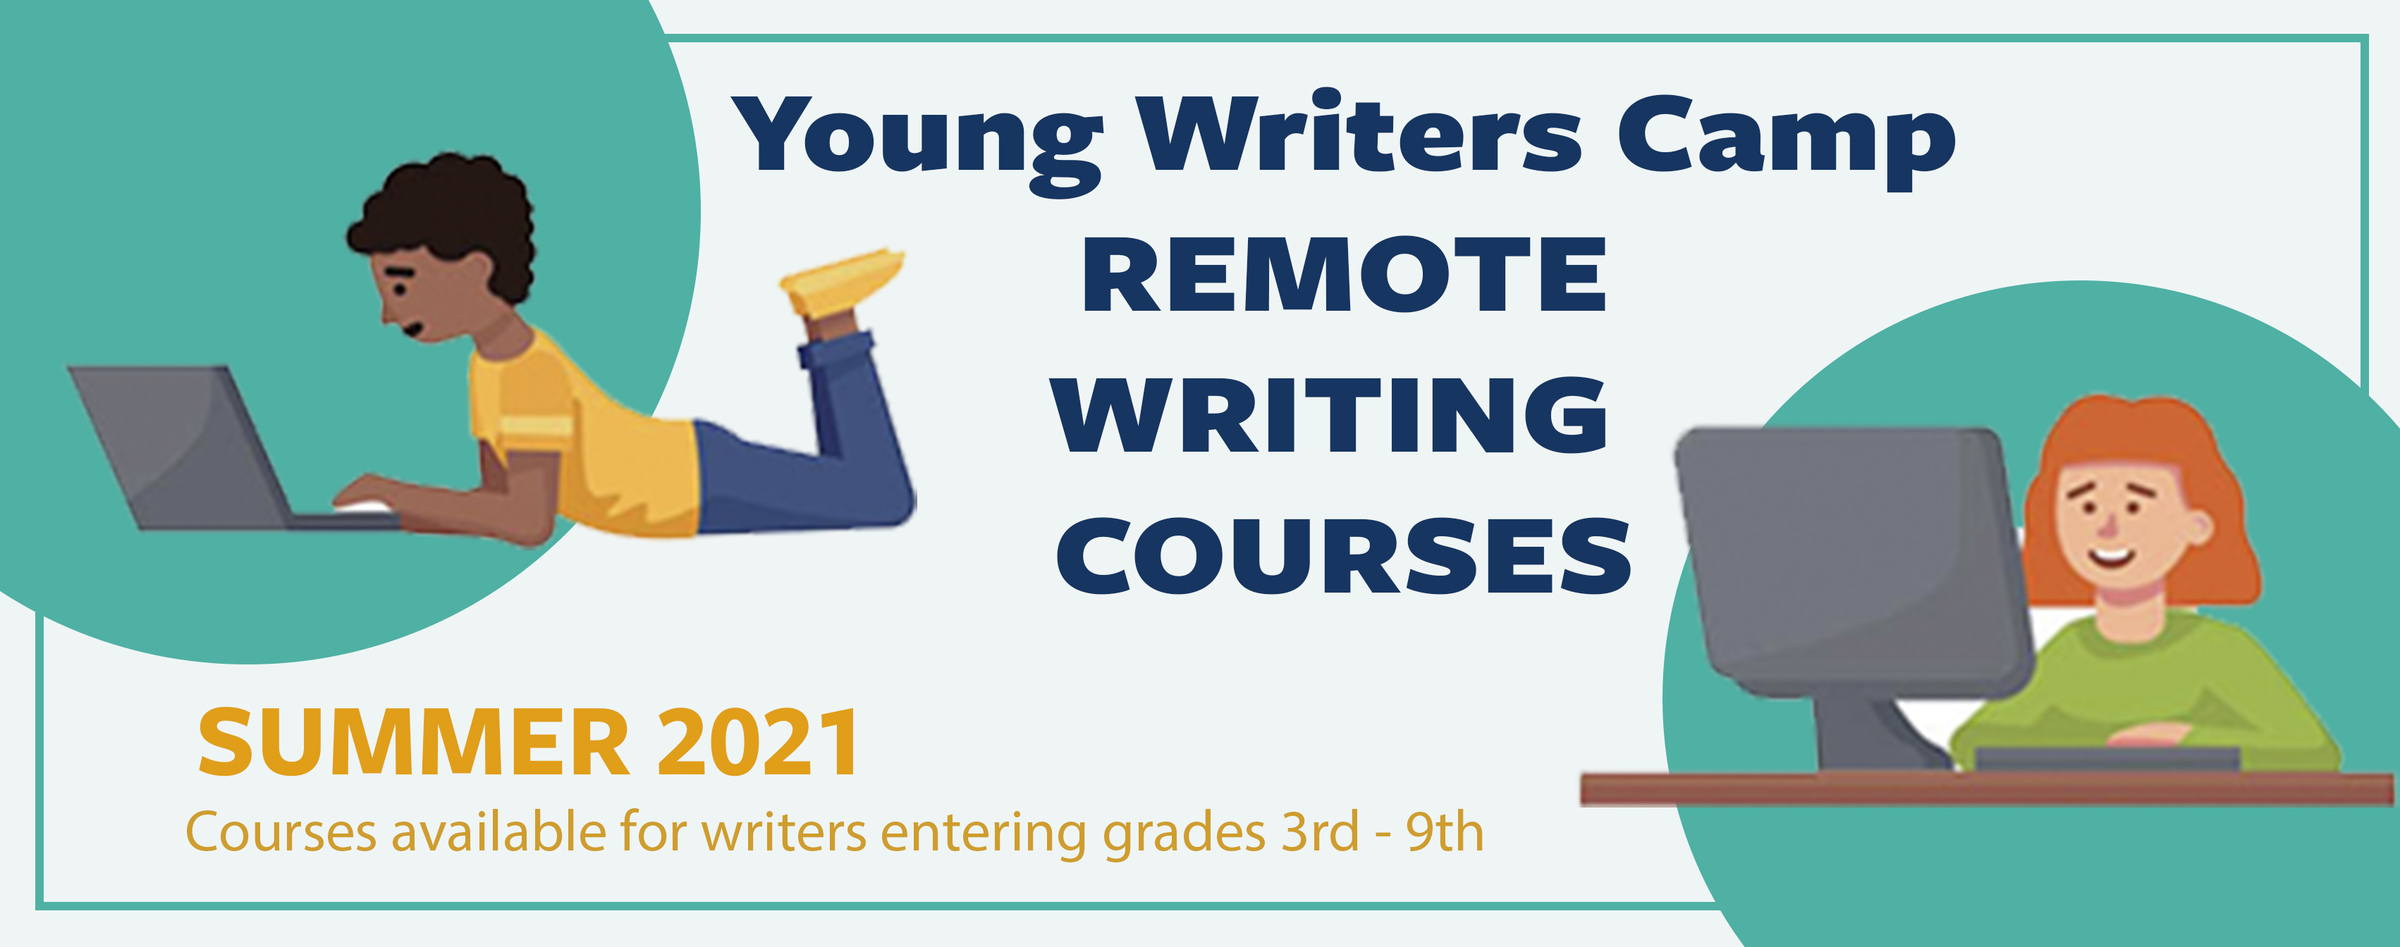 Registration for YWC Remote Writing Courses